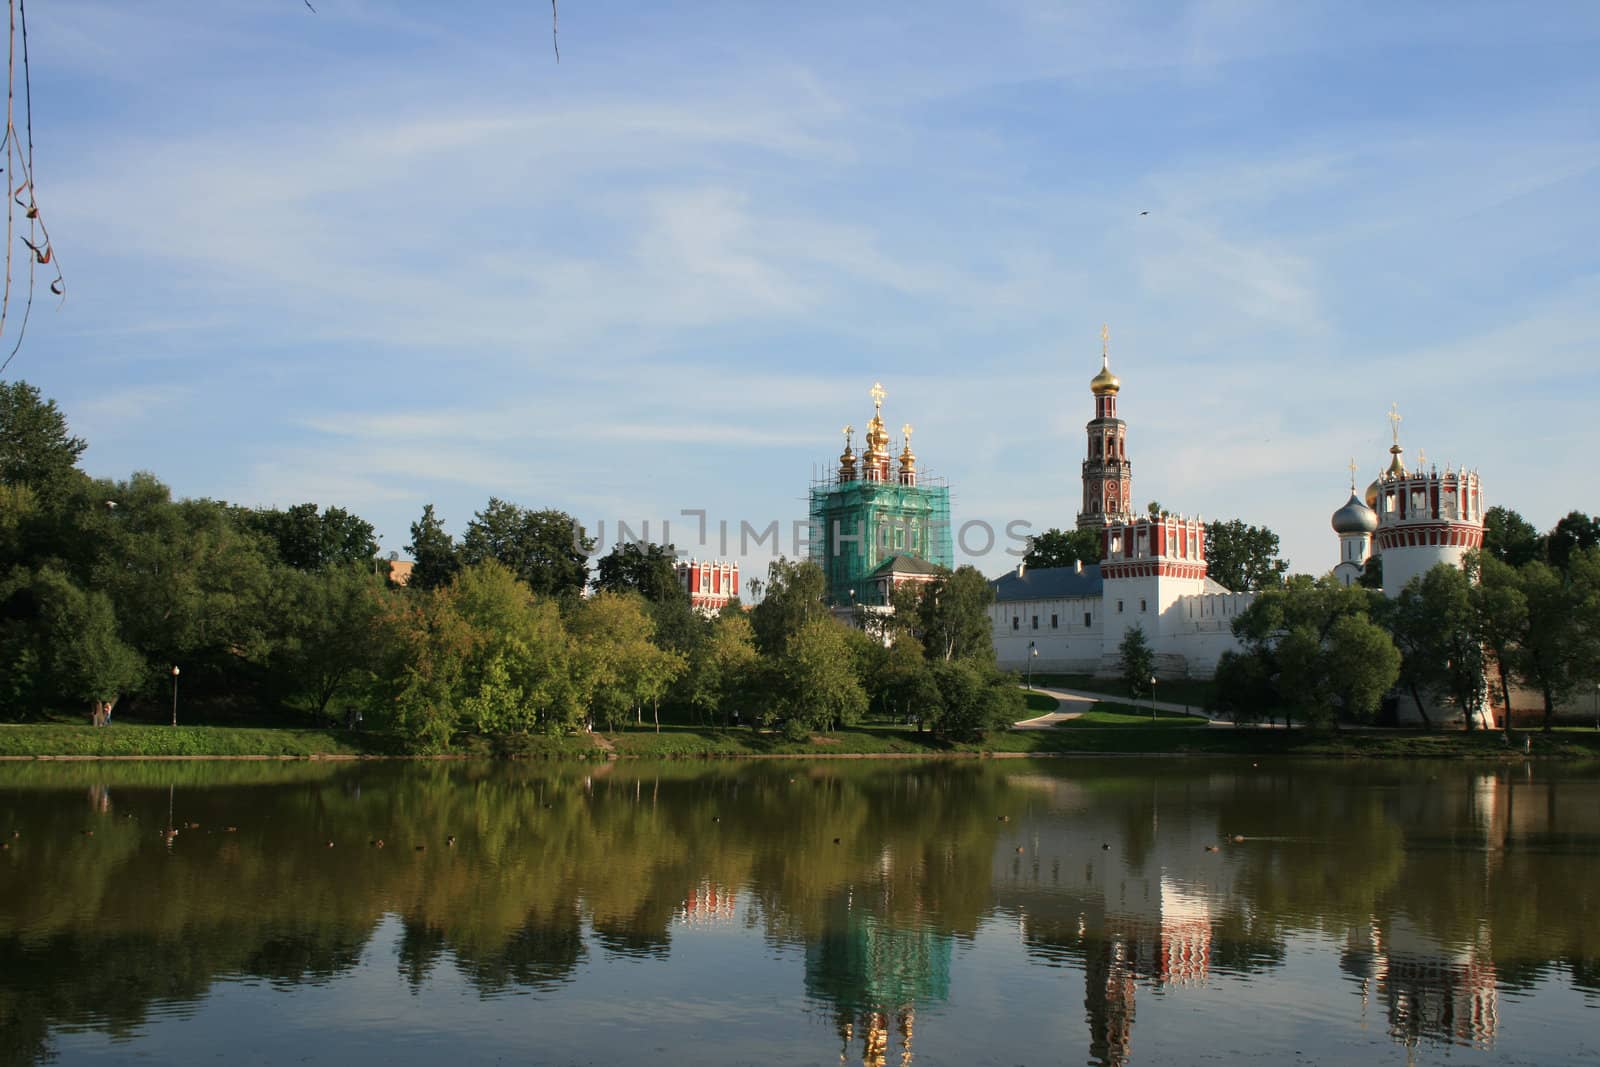 Novodevichy Convent and Cemetery by Vof